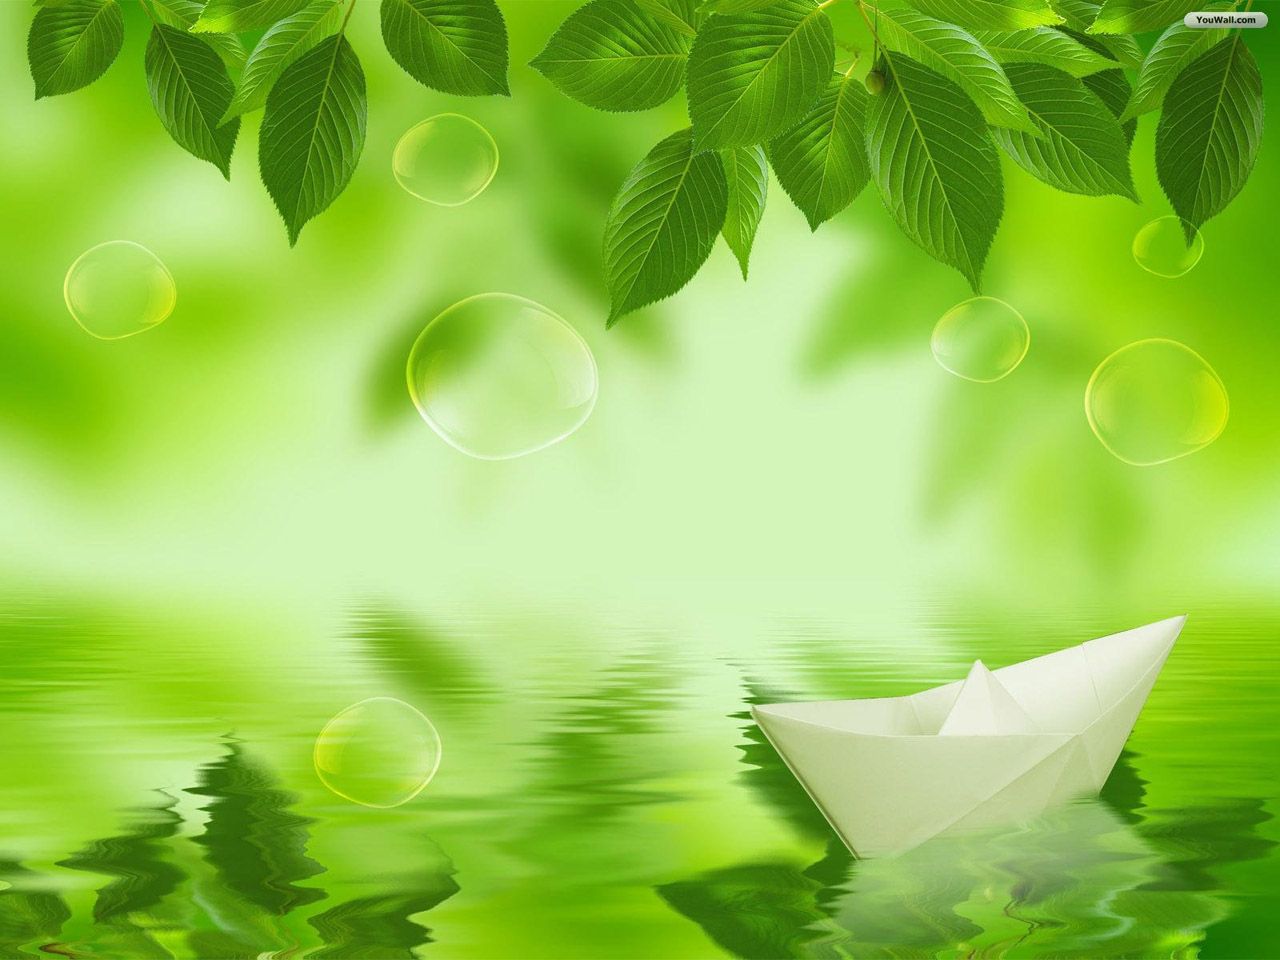 All Kinds Beautifull Wallpapers Green Nature Lovely Backgrounds